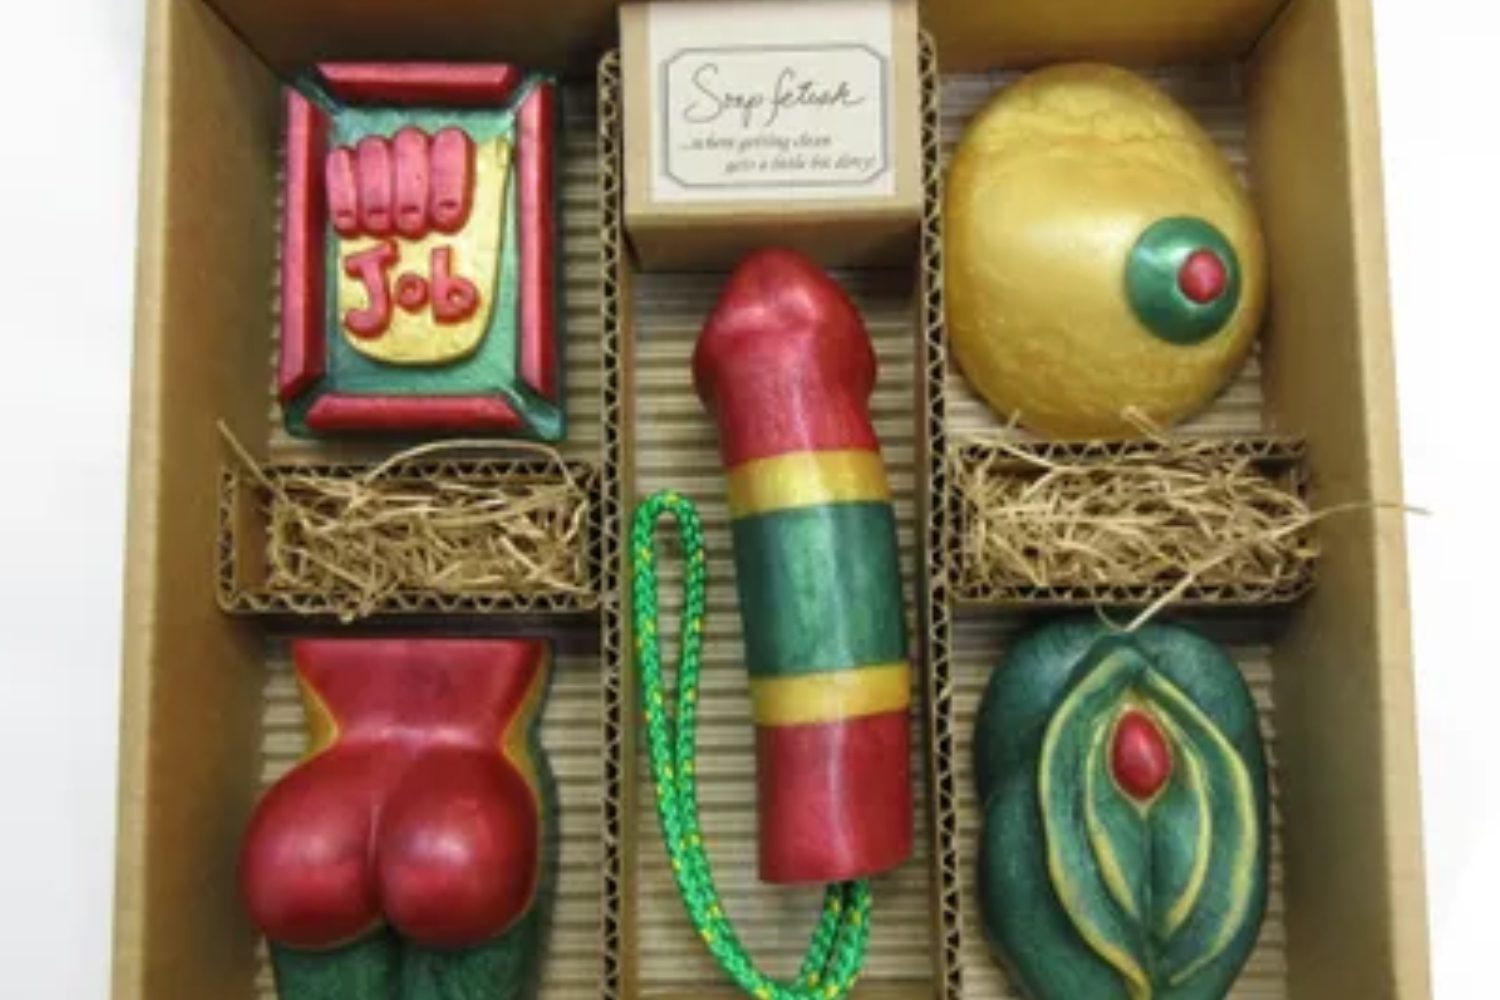 A box of various toys in the shape of a woman 's butt.